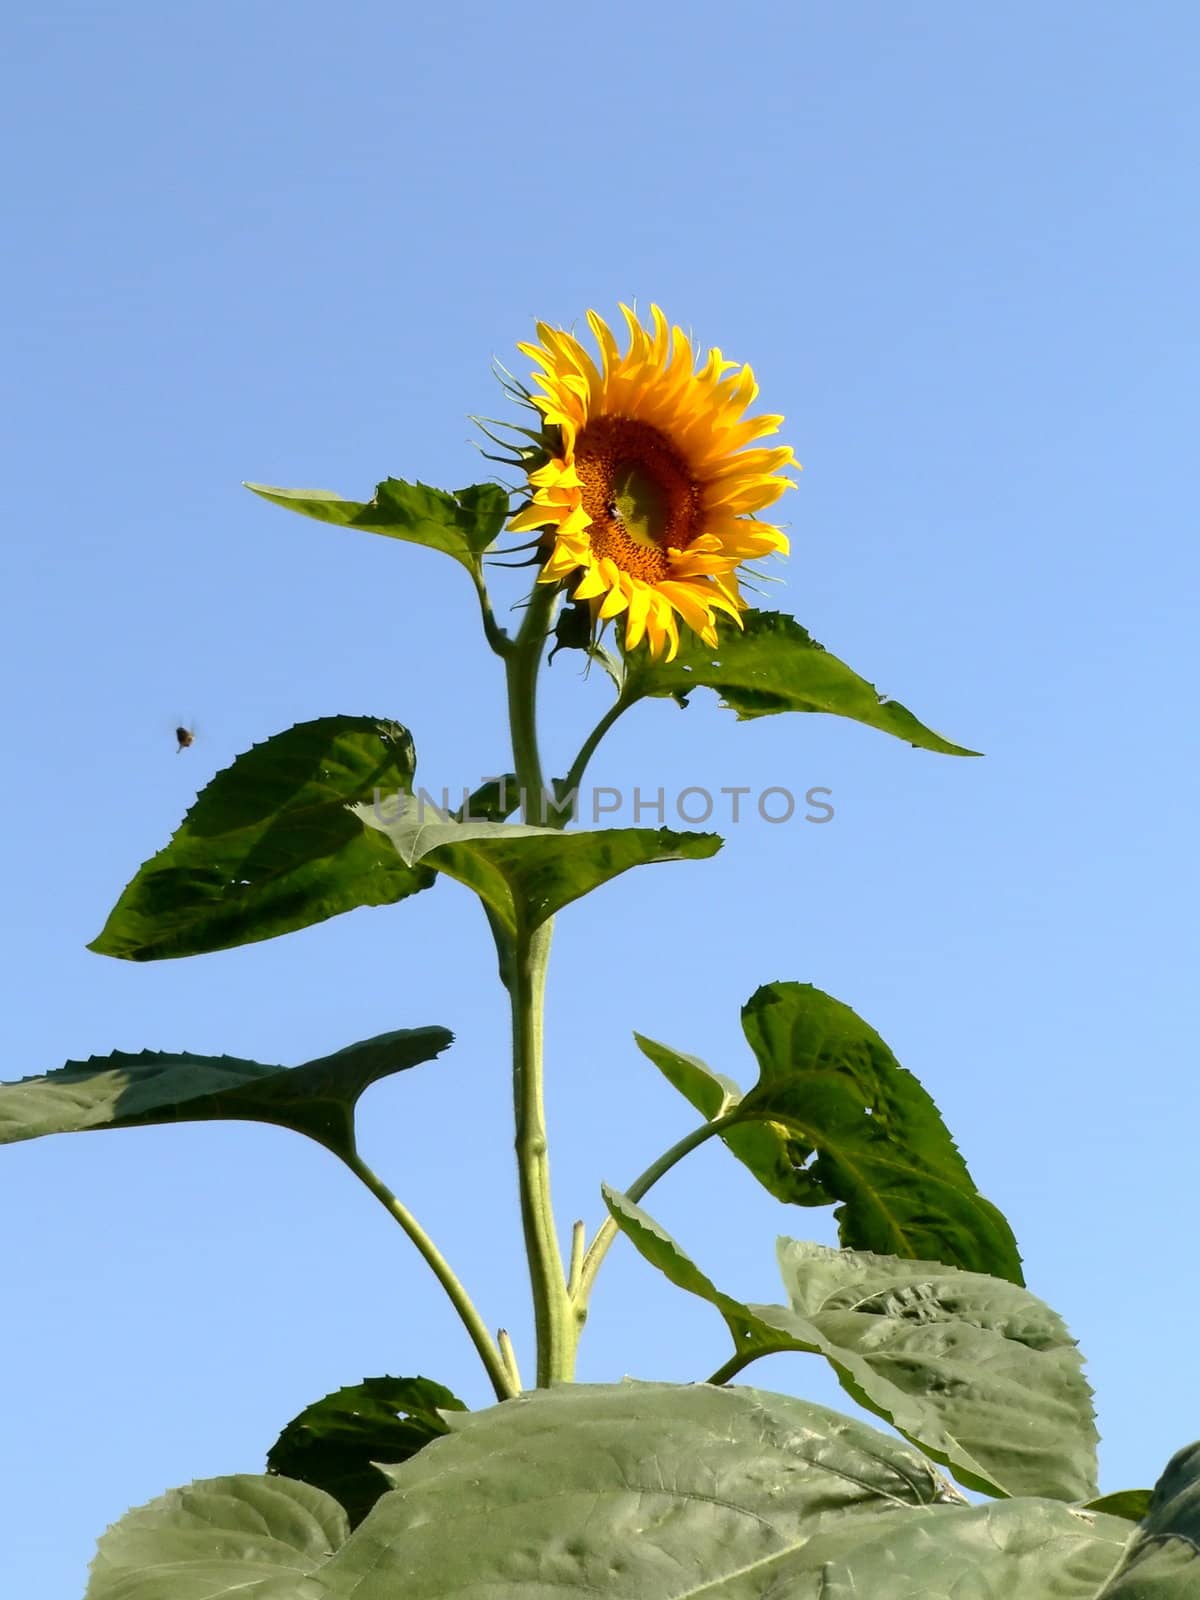 Sunflower and bee by ichip